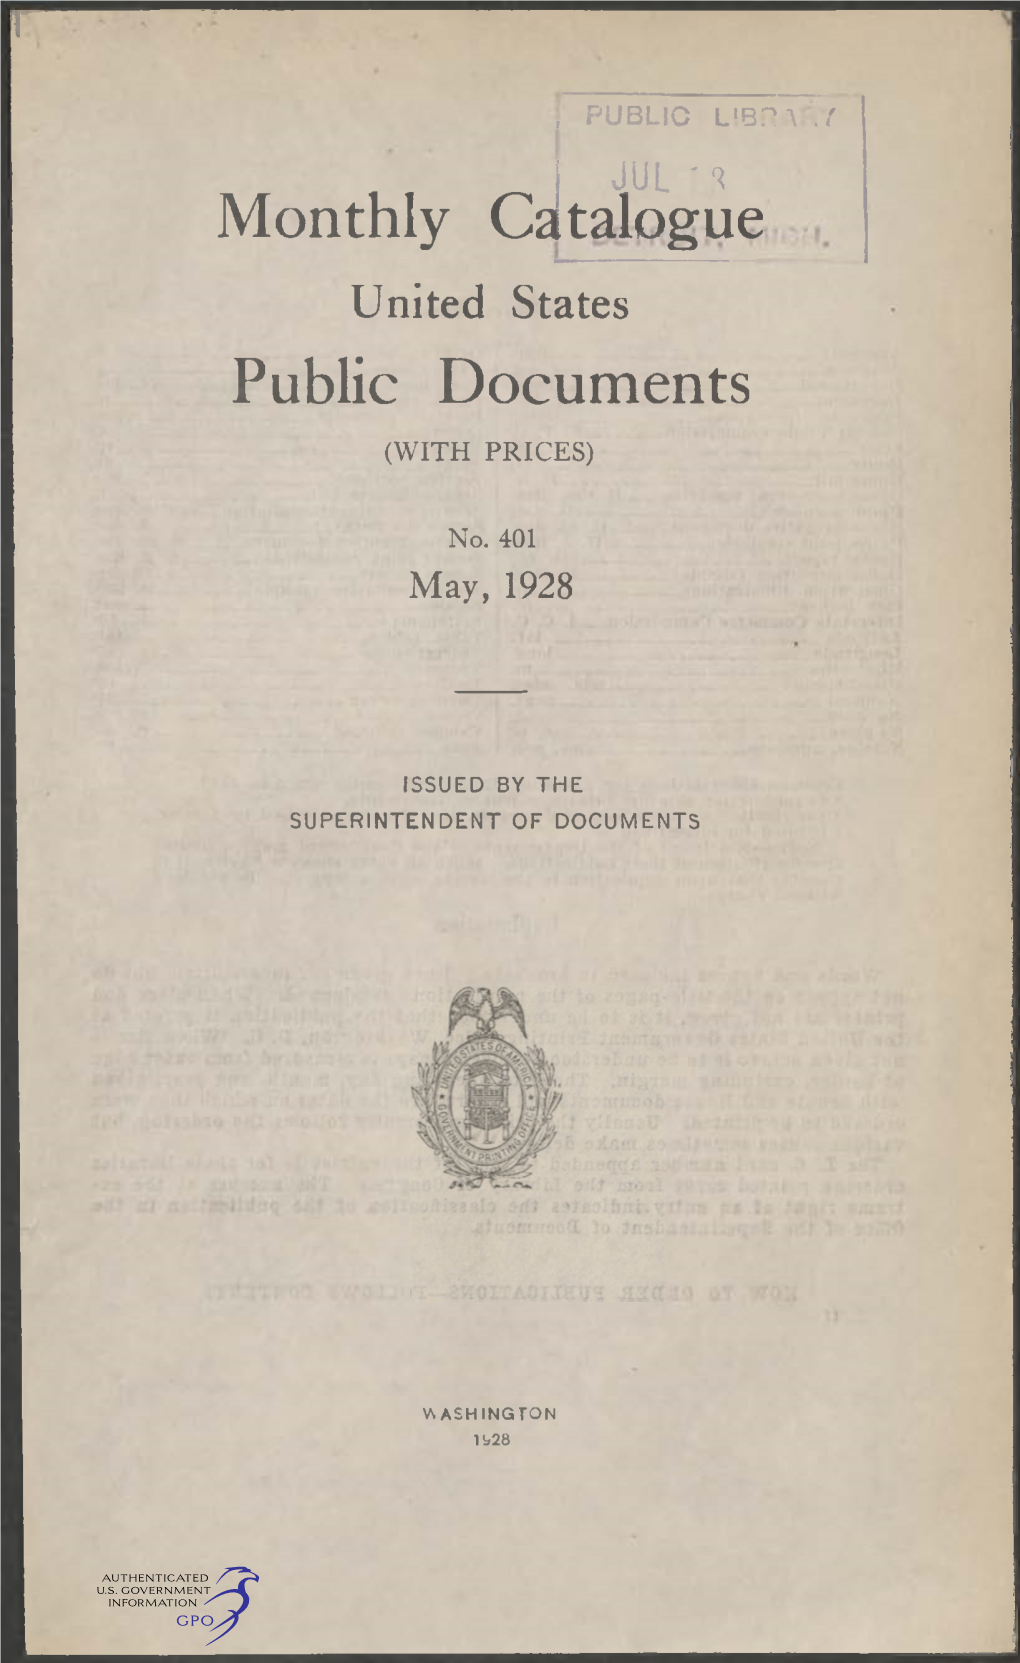 Monthly Catalogue, United States Public Documents, May 1928